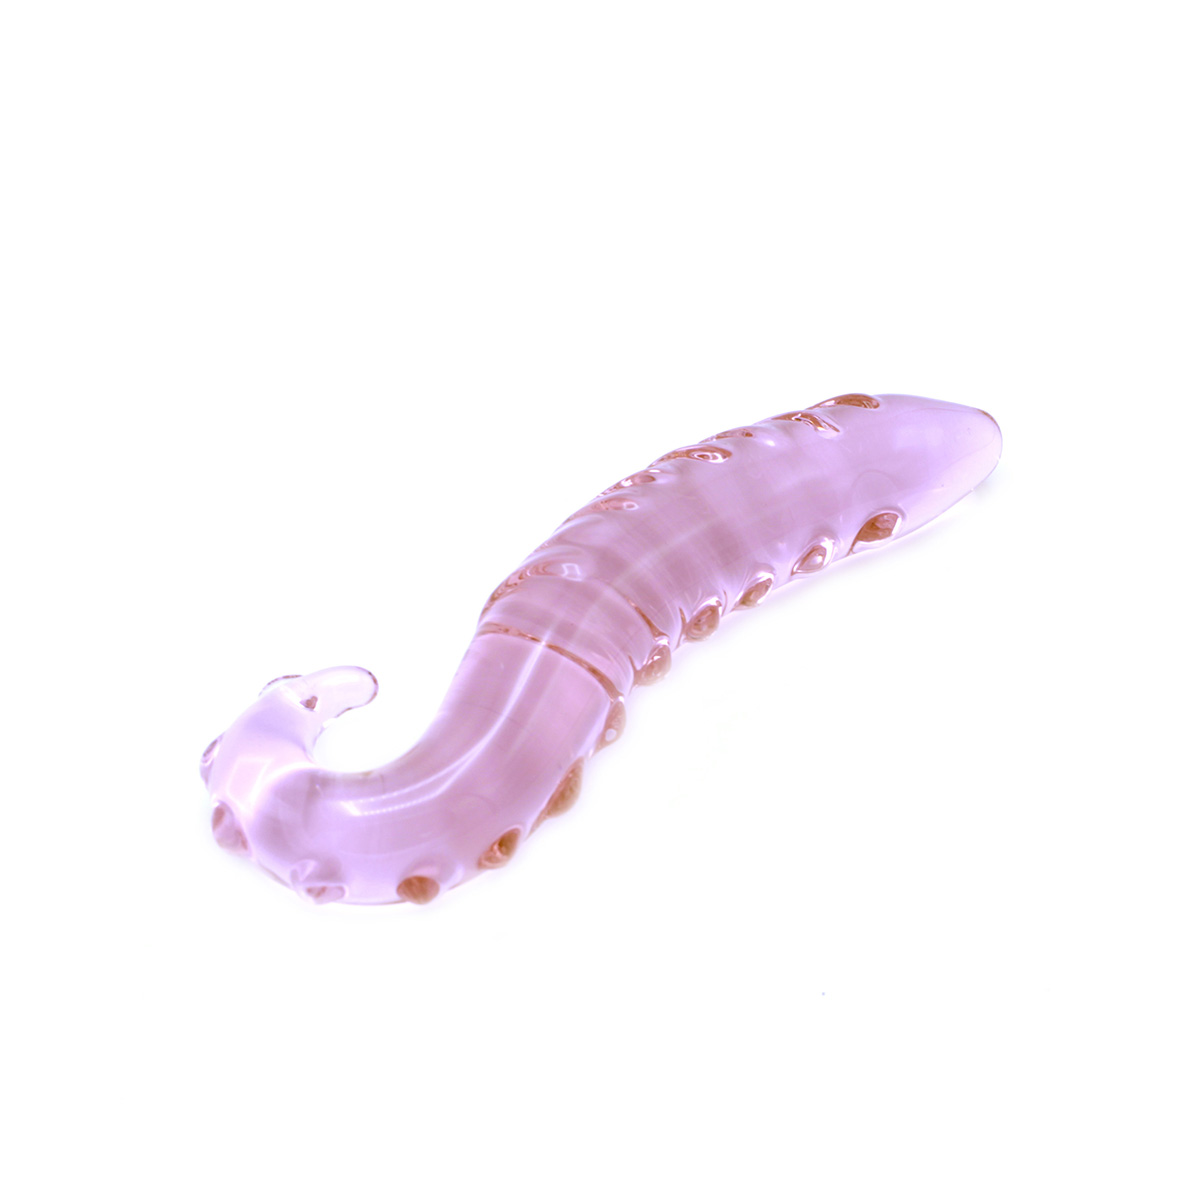 Pink-Tentacle-Glass-Dildo-OPR-2820063-5